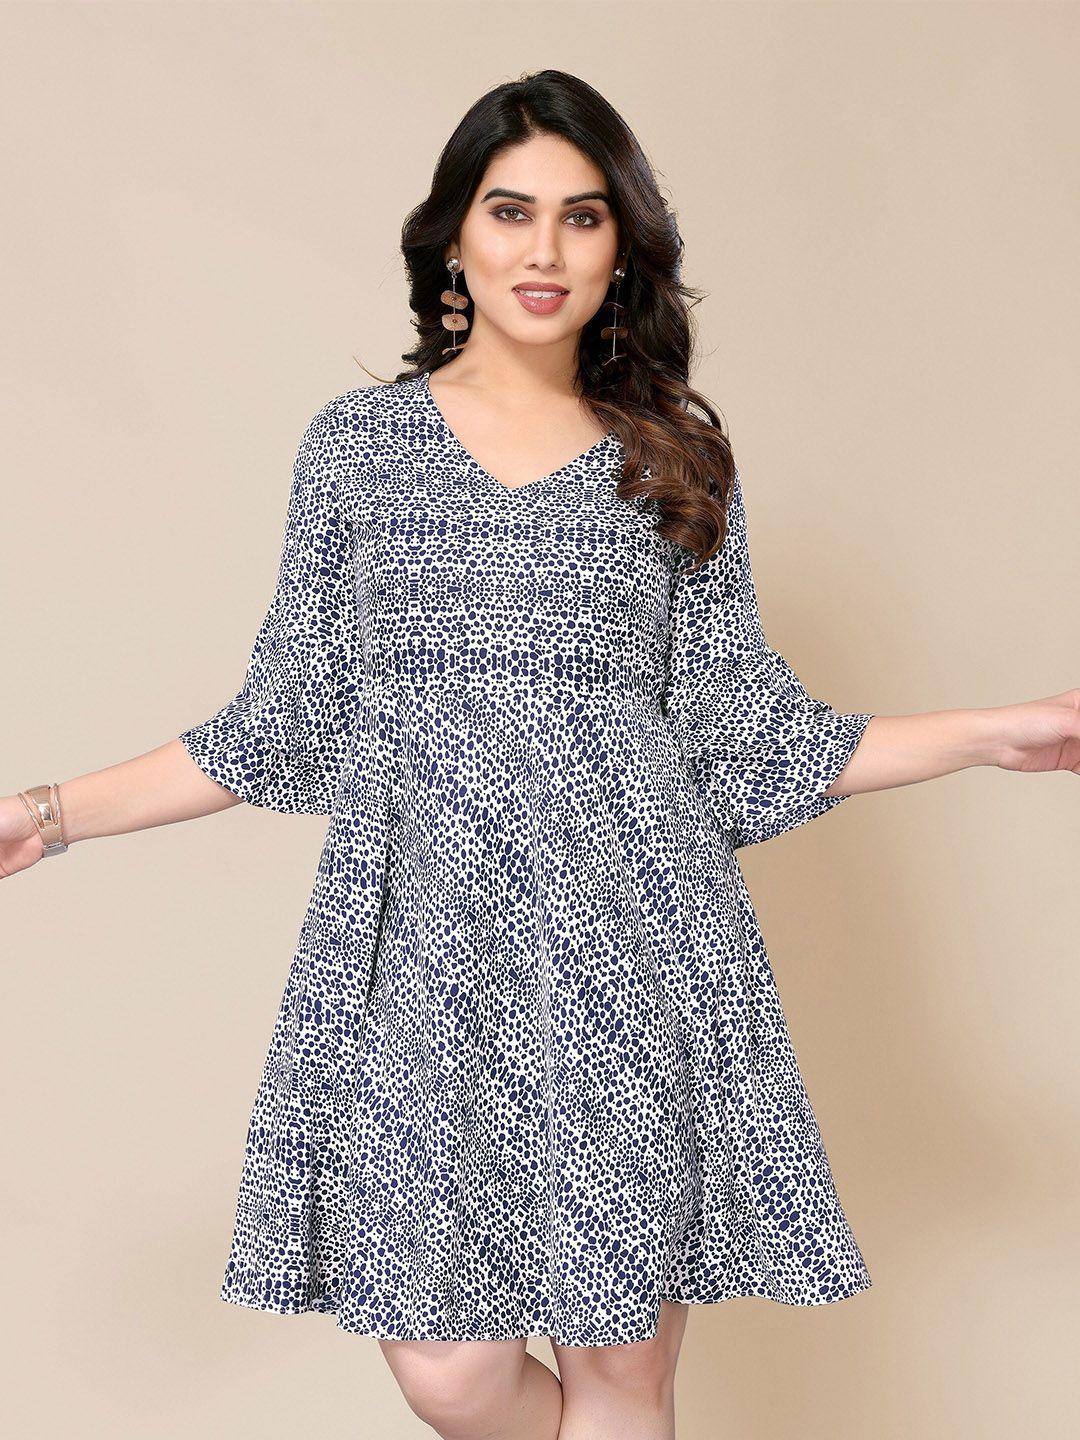 pyari - a style for every story abstract printed bell sleeves a-line dress